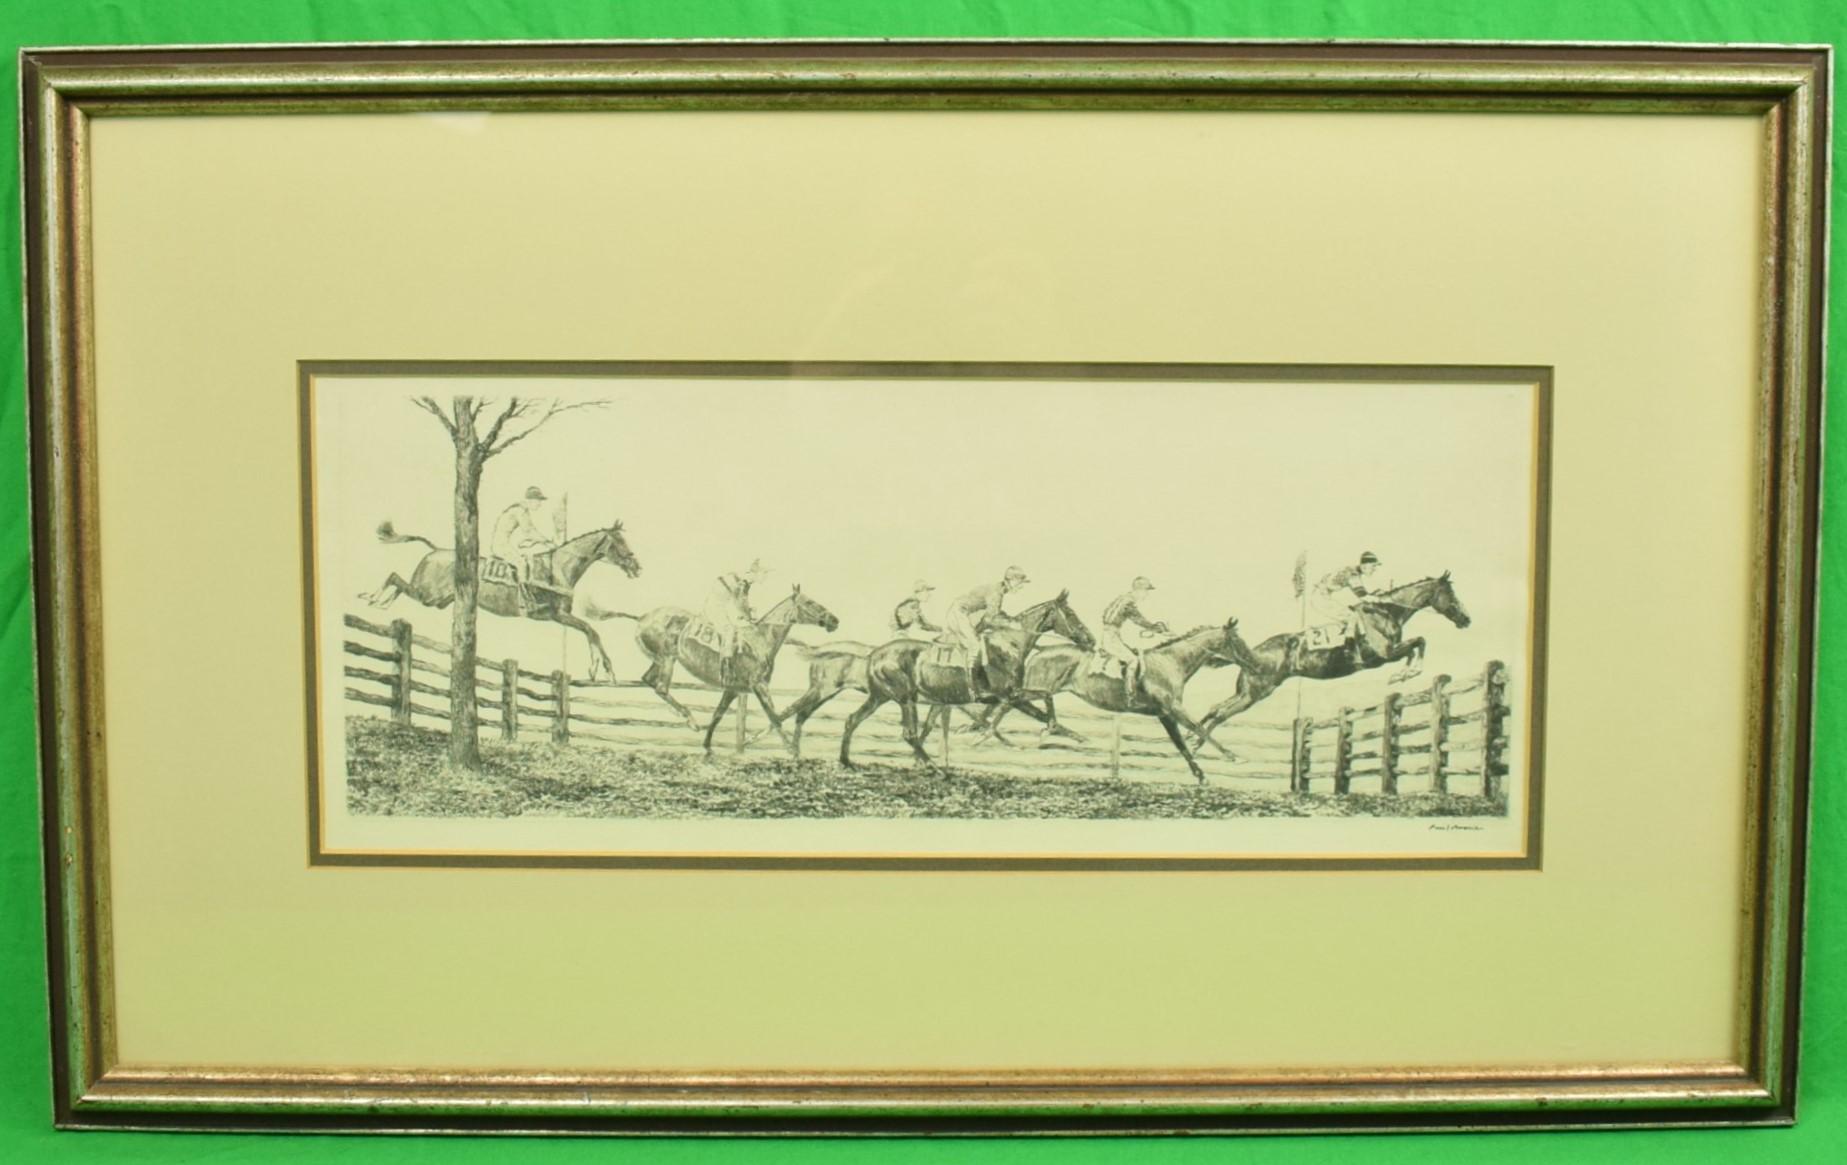 "New Jersey Hunt Cup" circa 1930 Drypoint by Paul Brown